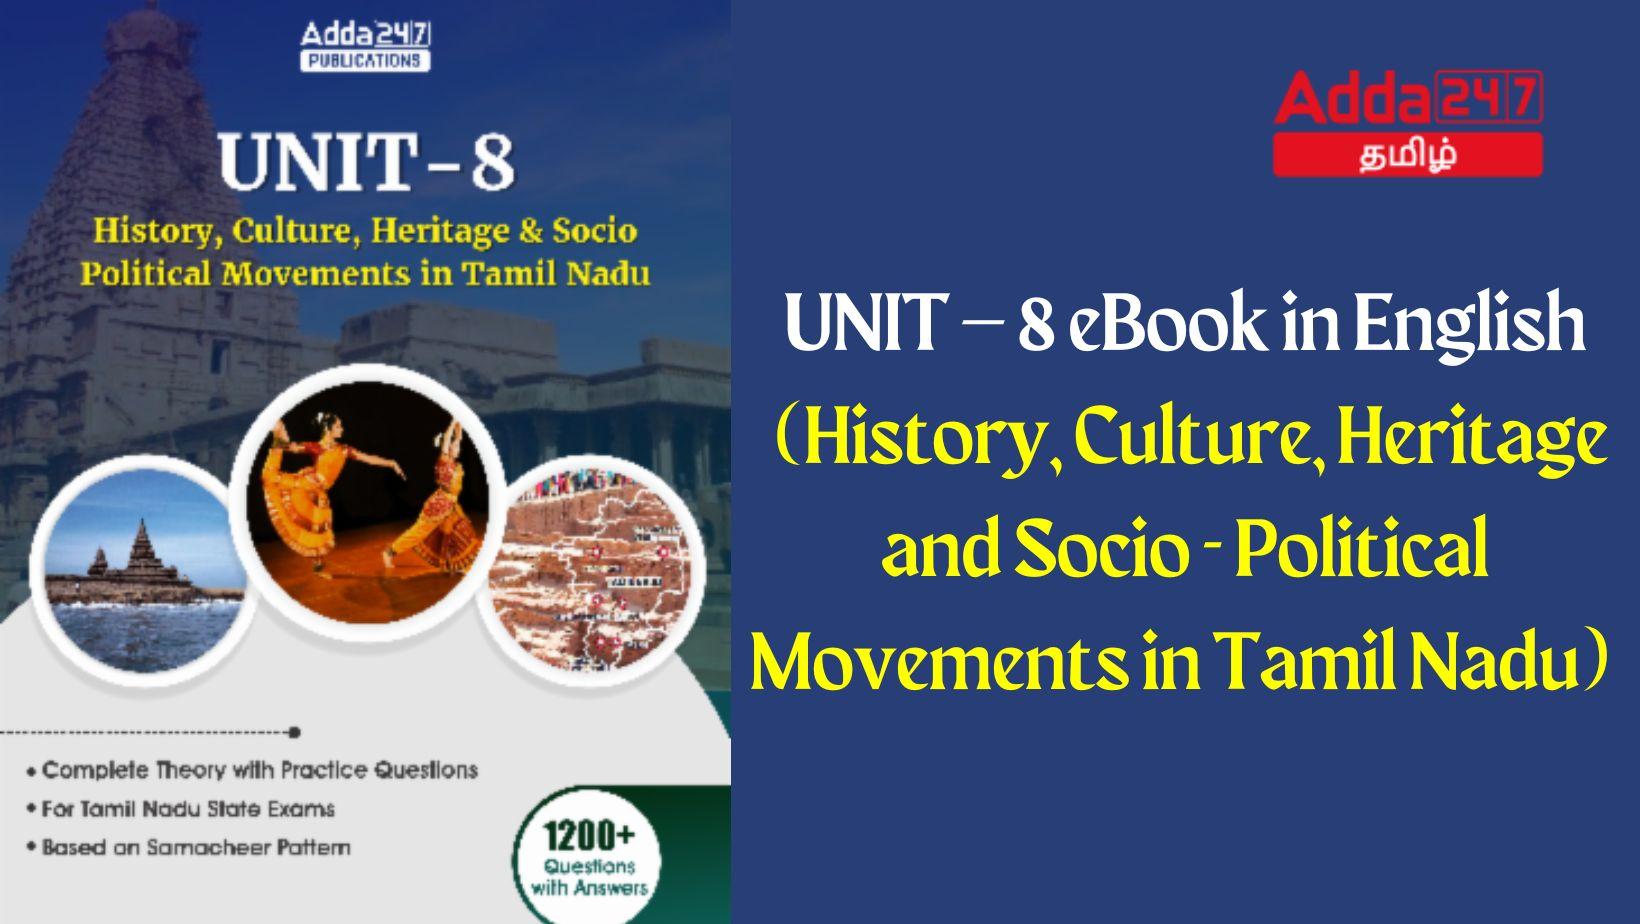 Unit 8 eBook in English - History, Culture, Heritage and Socio - Political Movements in Tamil Nadu_30.1